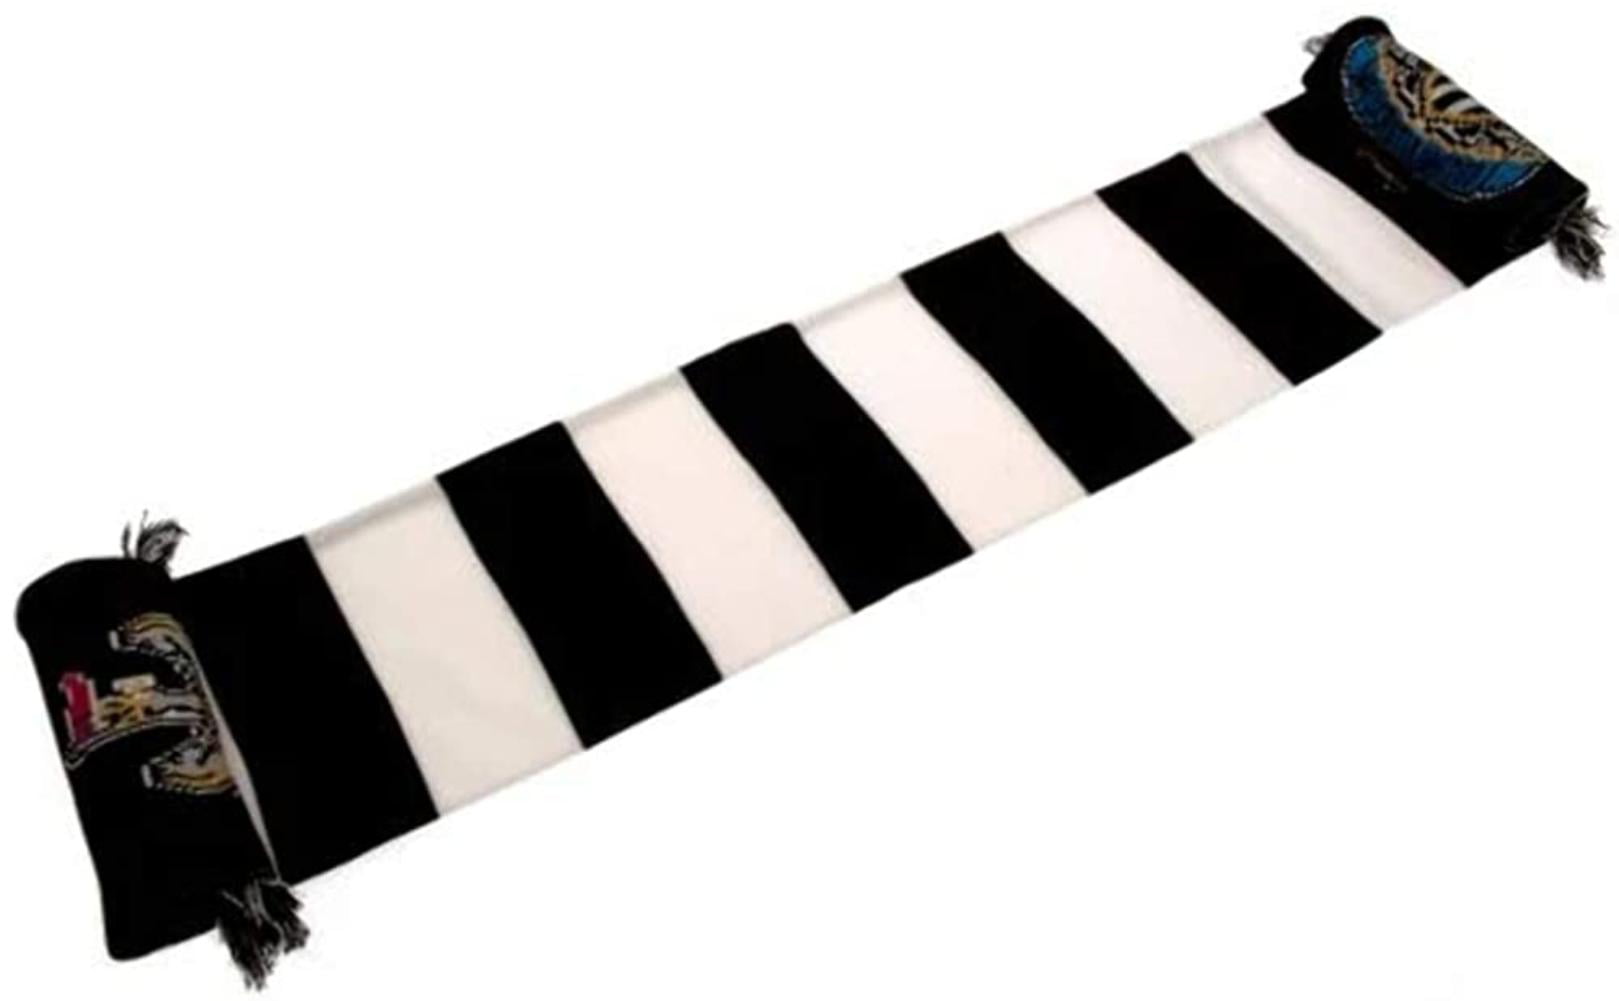 100% Acrylic Newcastle United Official Football Crest Traditional Fans Bar Scarf